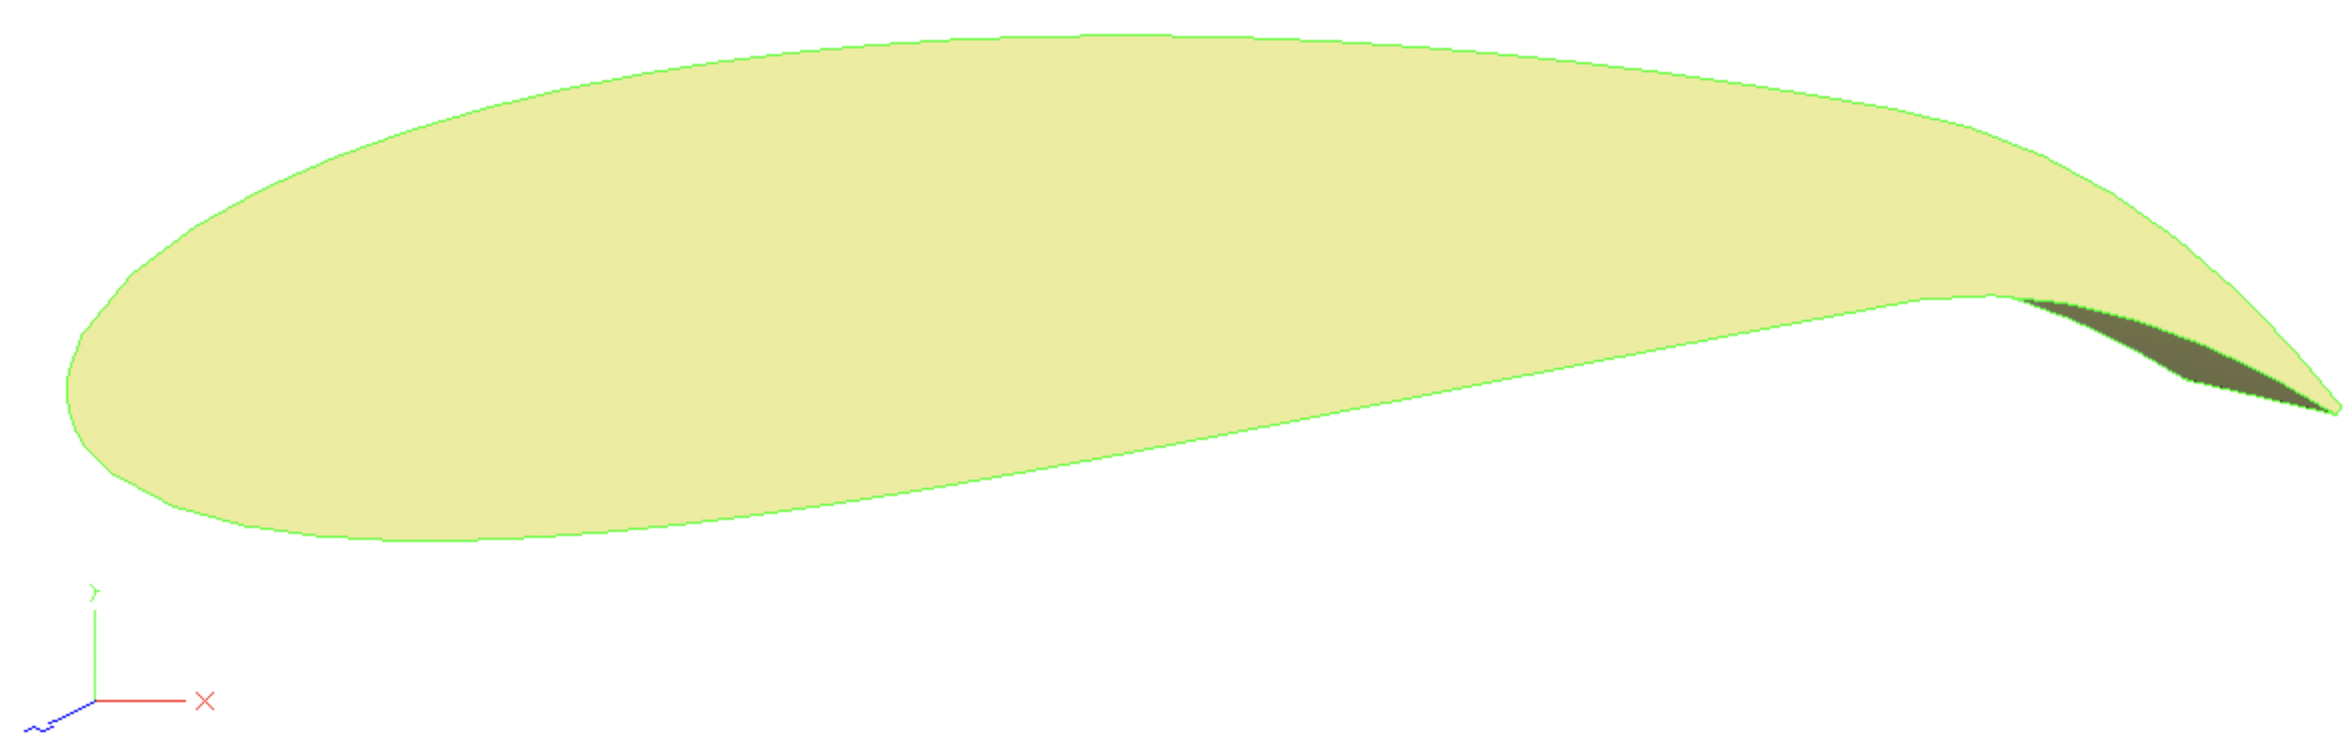 _images/new_airfoil.png